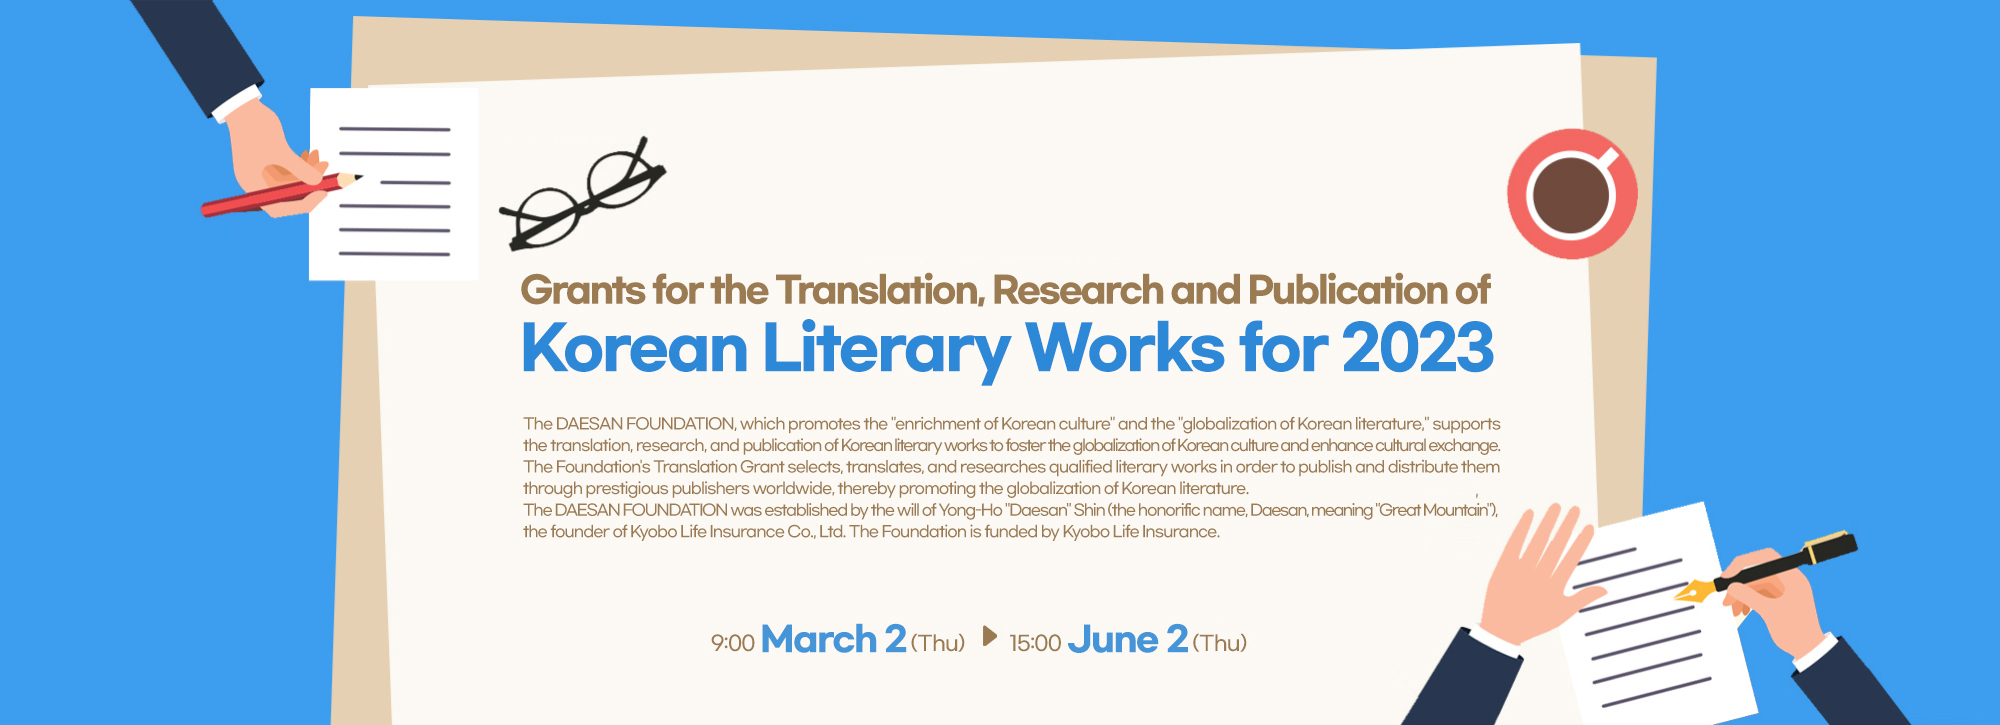 Grants for the Translation, Research and Publication of Korean Literary Works for 2023